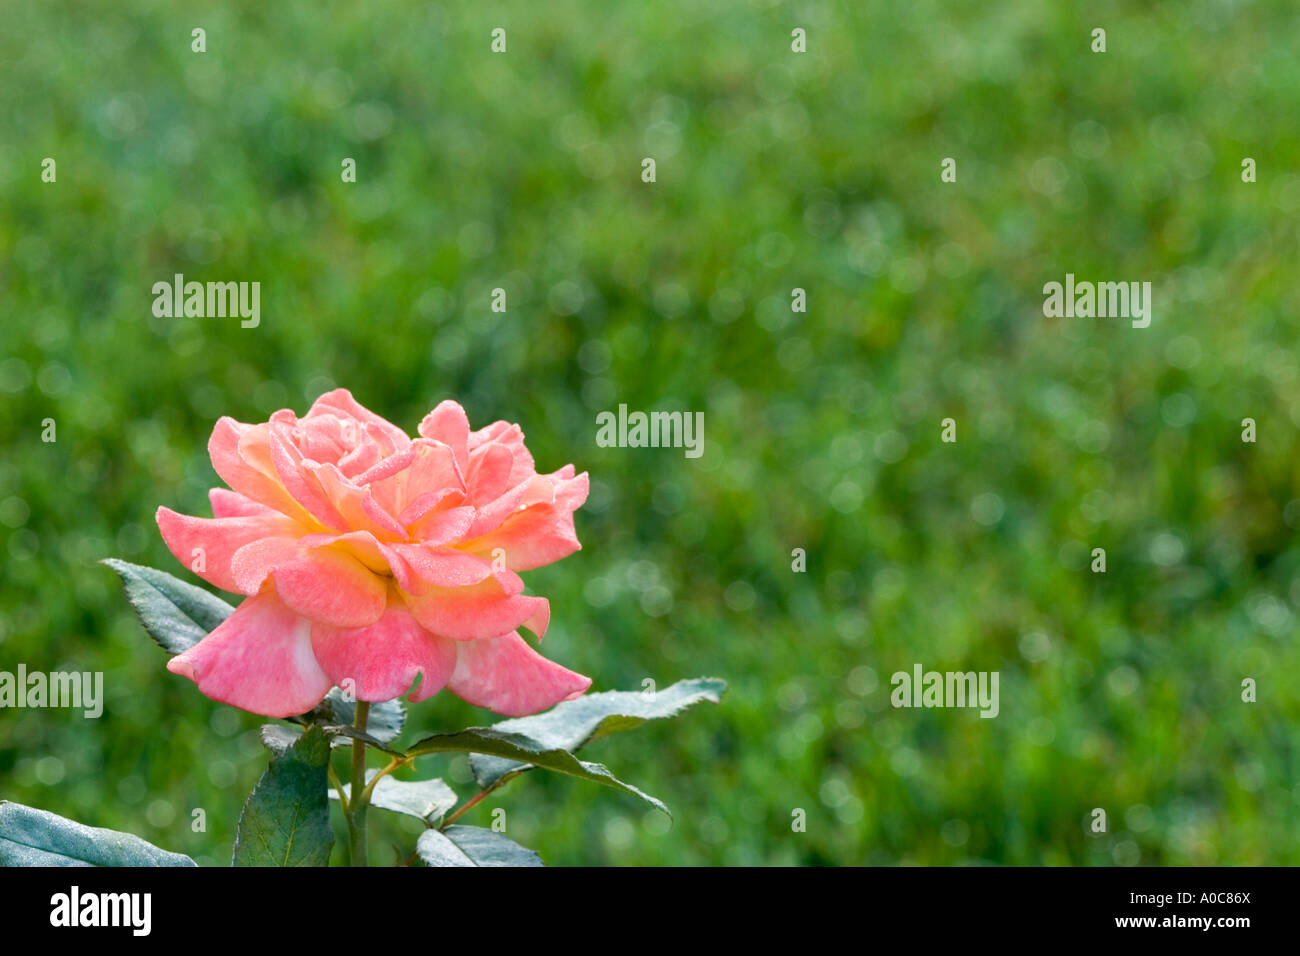 Pink rose against a grass background Stock Photo